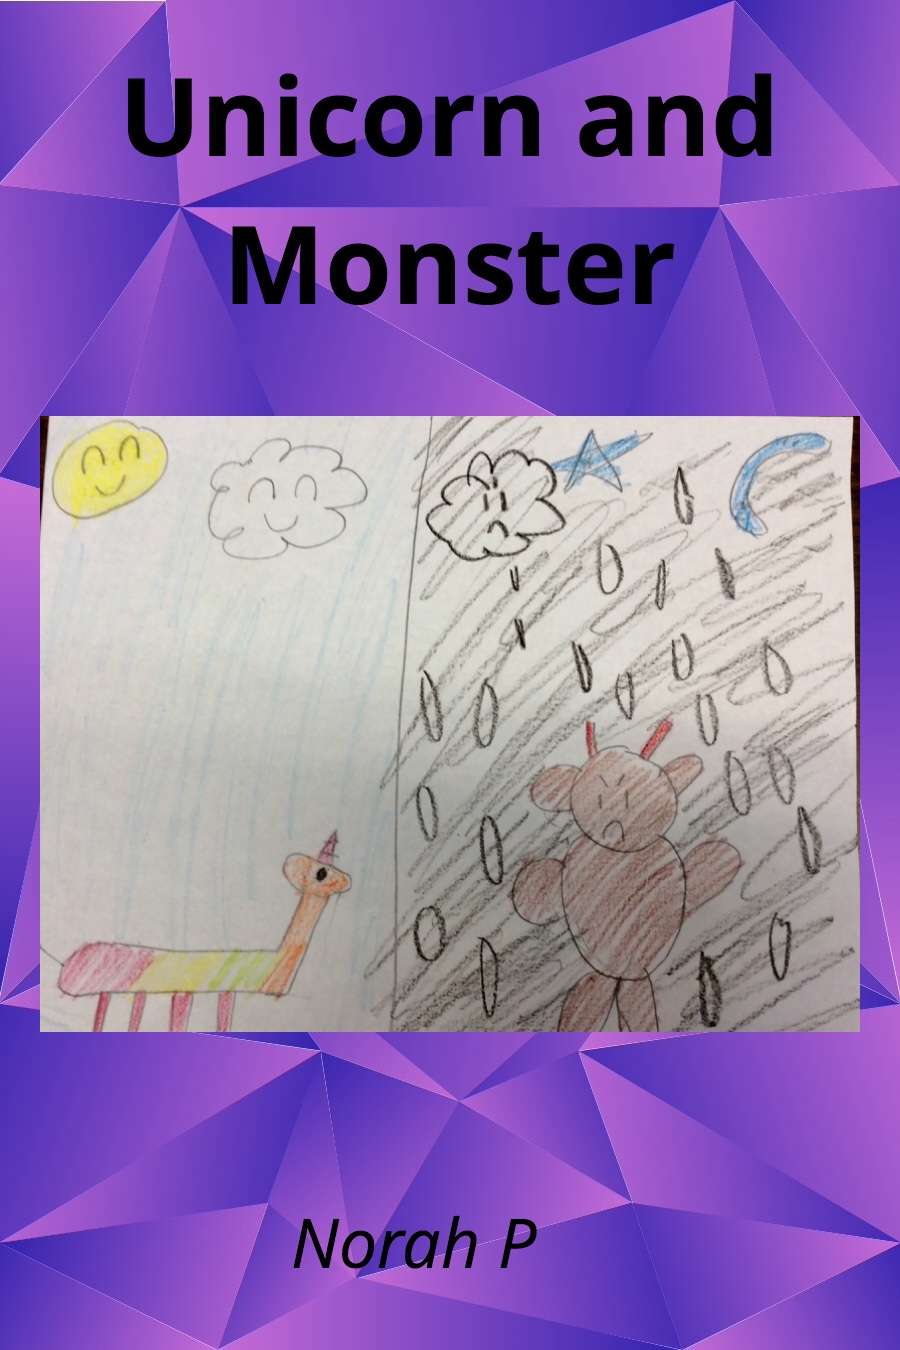 Unicorn and Monster by Norah P